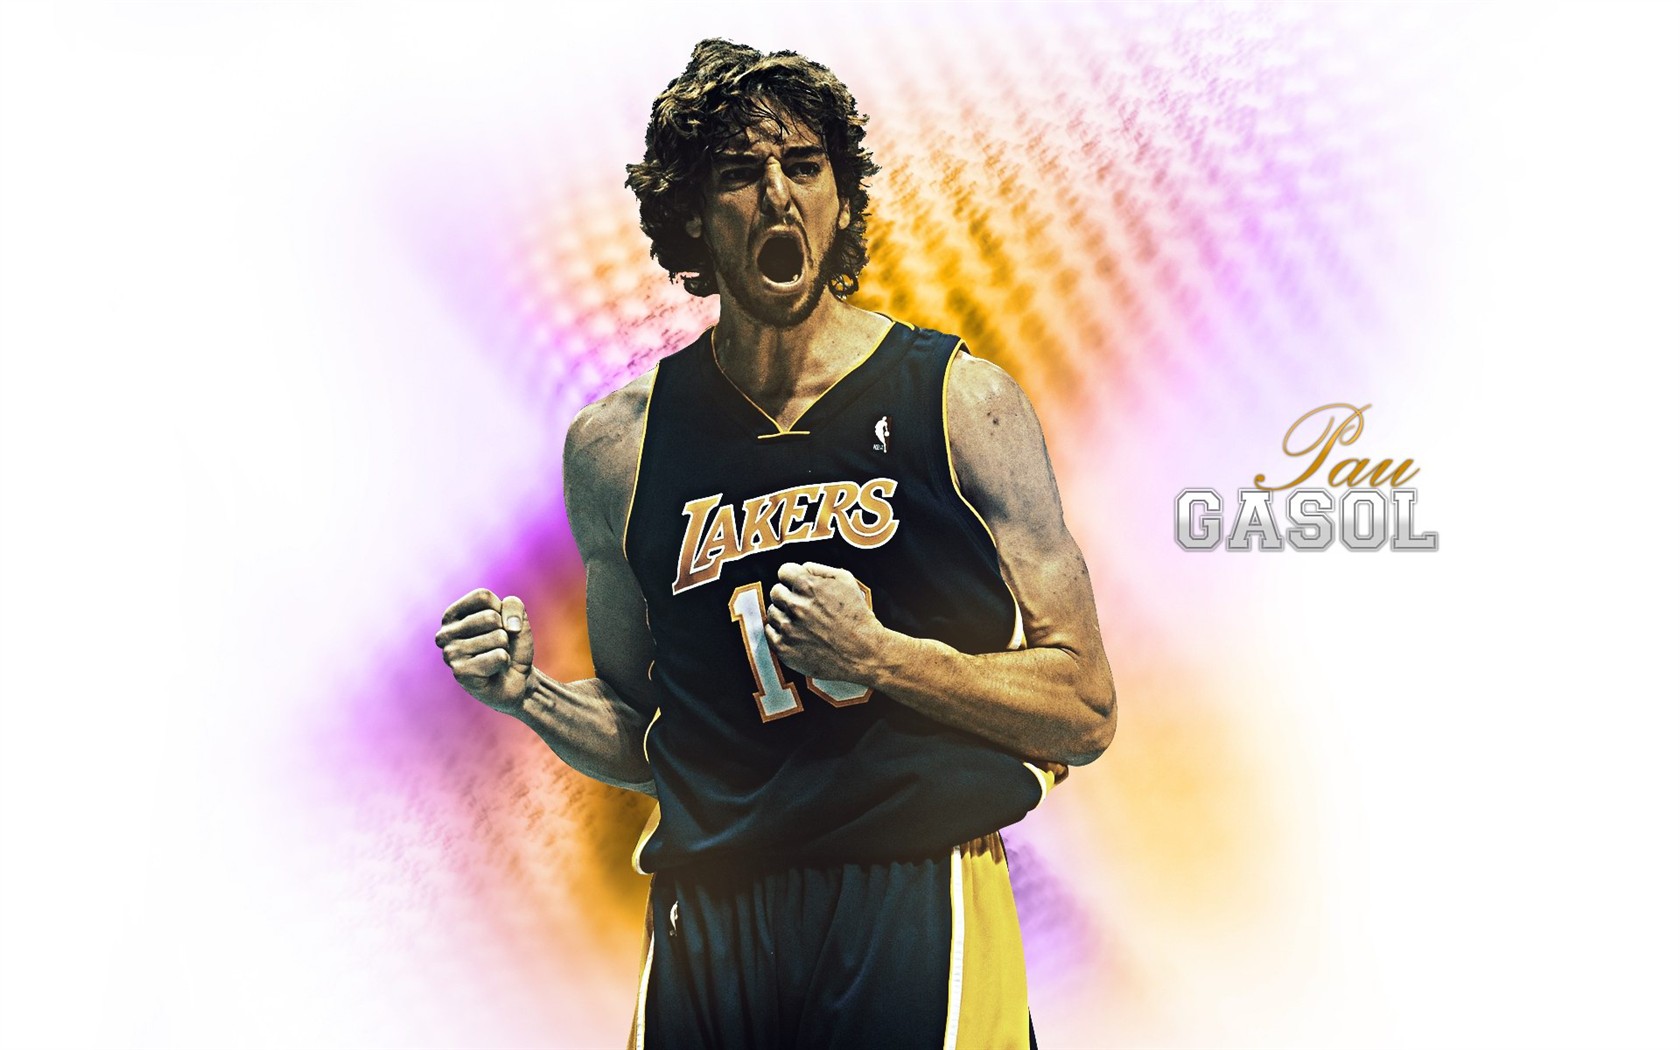 Los Angeles Lakers Wallpaper Oficial #21 - 1680x1050